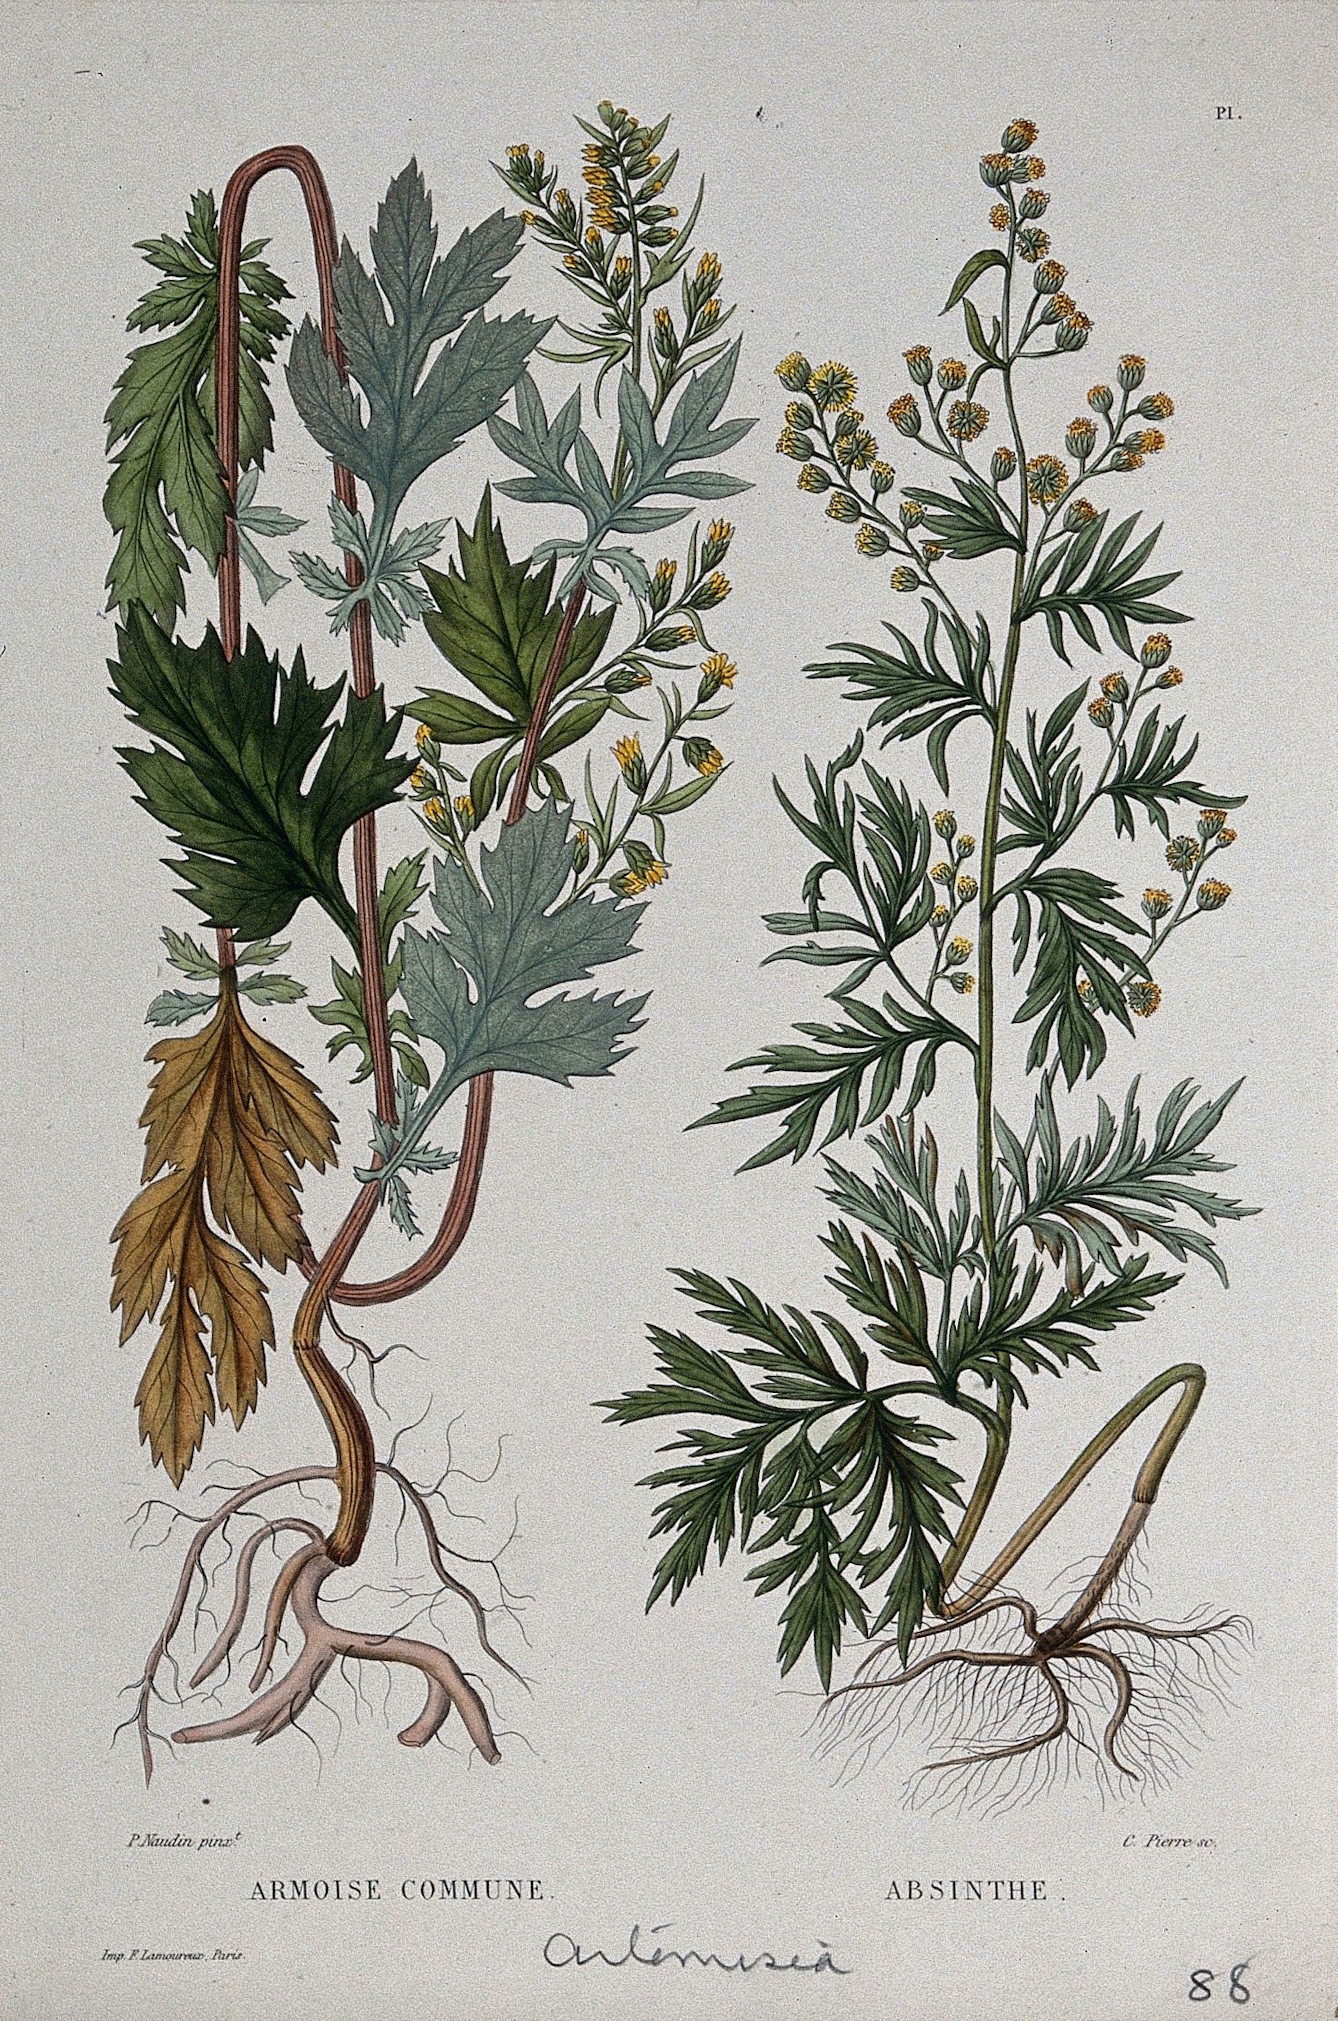 A botanical illustration of two plants showing roots, stems, leaves, buds and flowers.